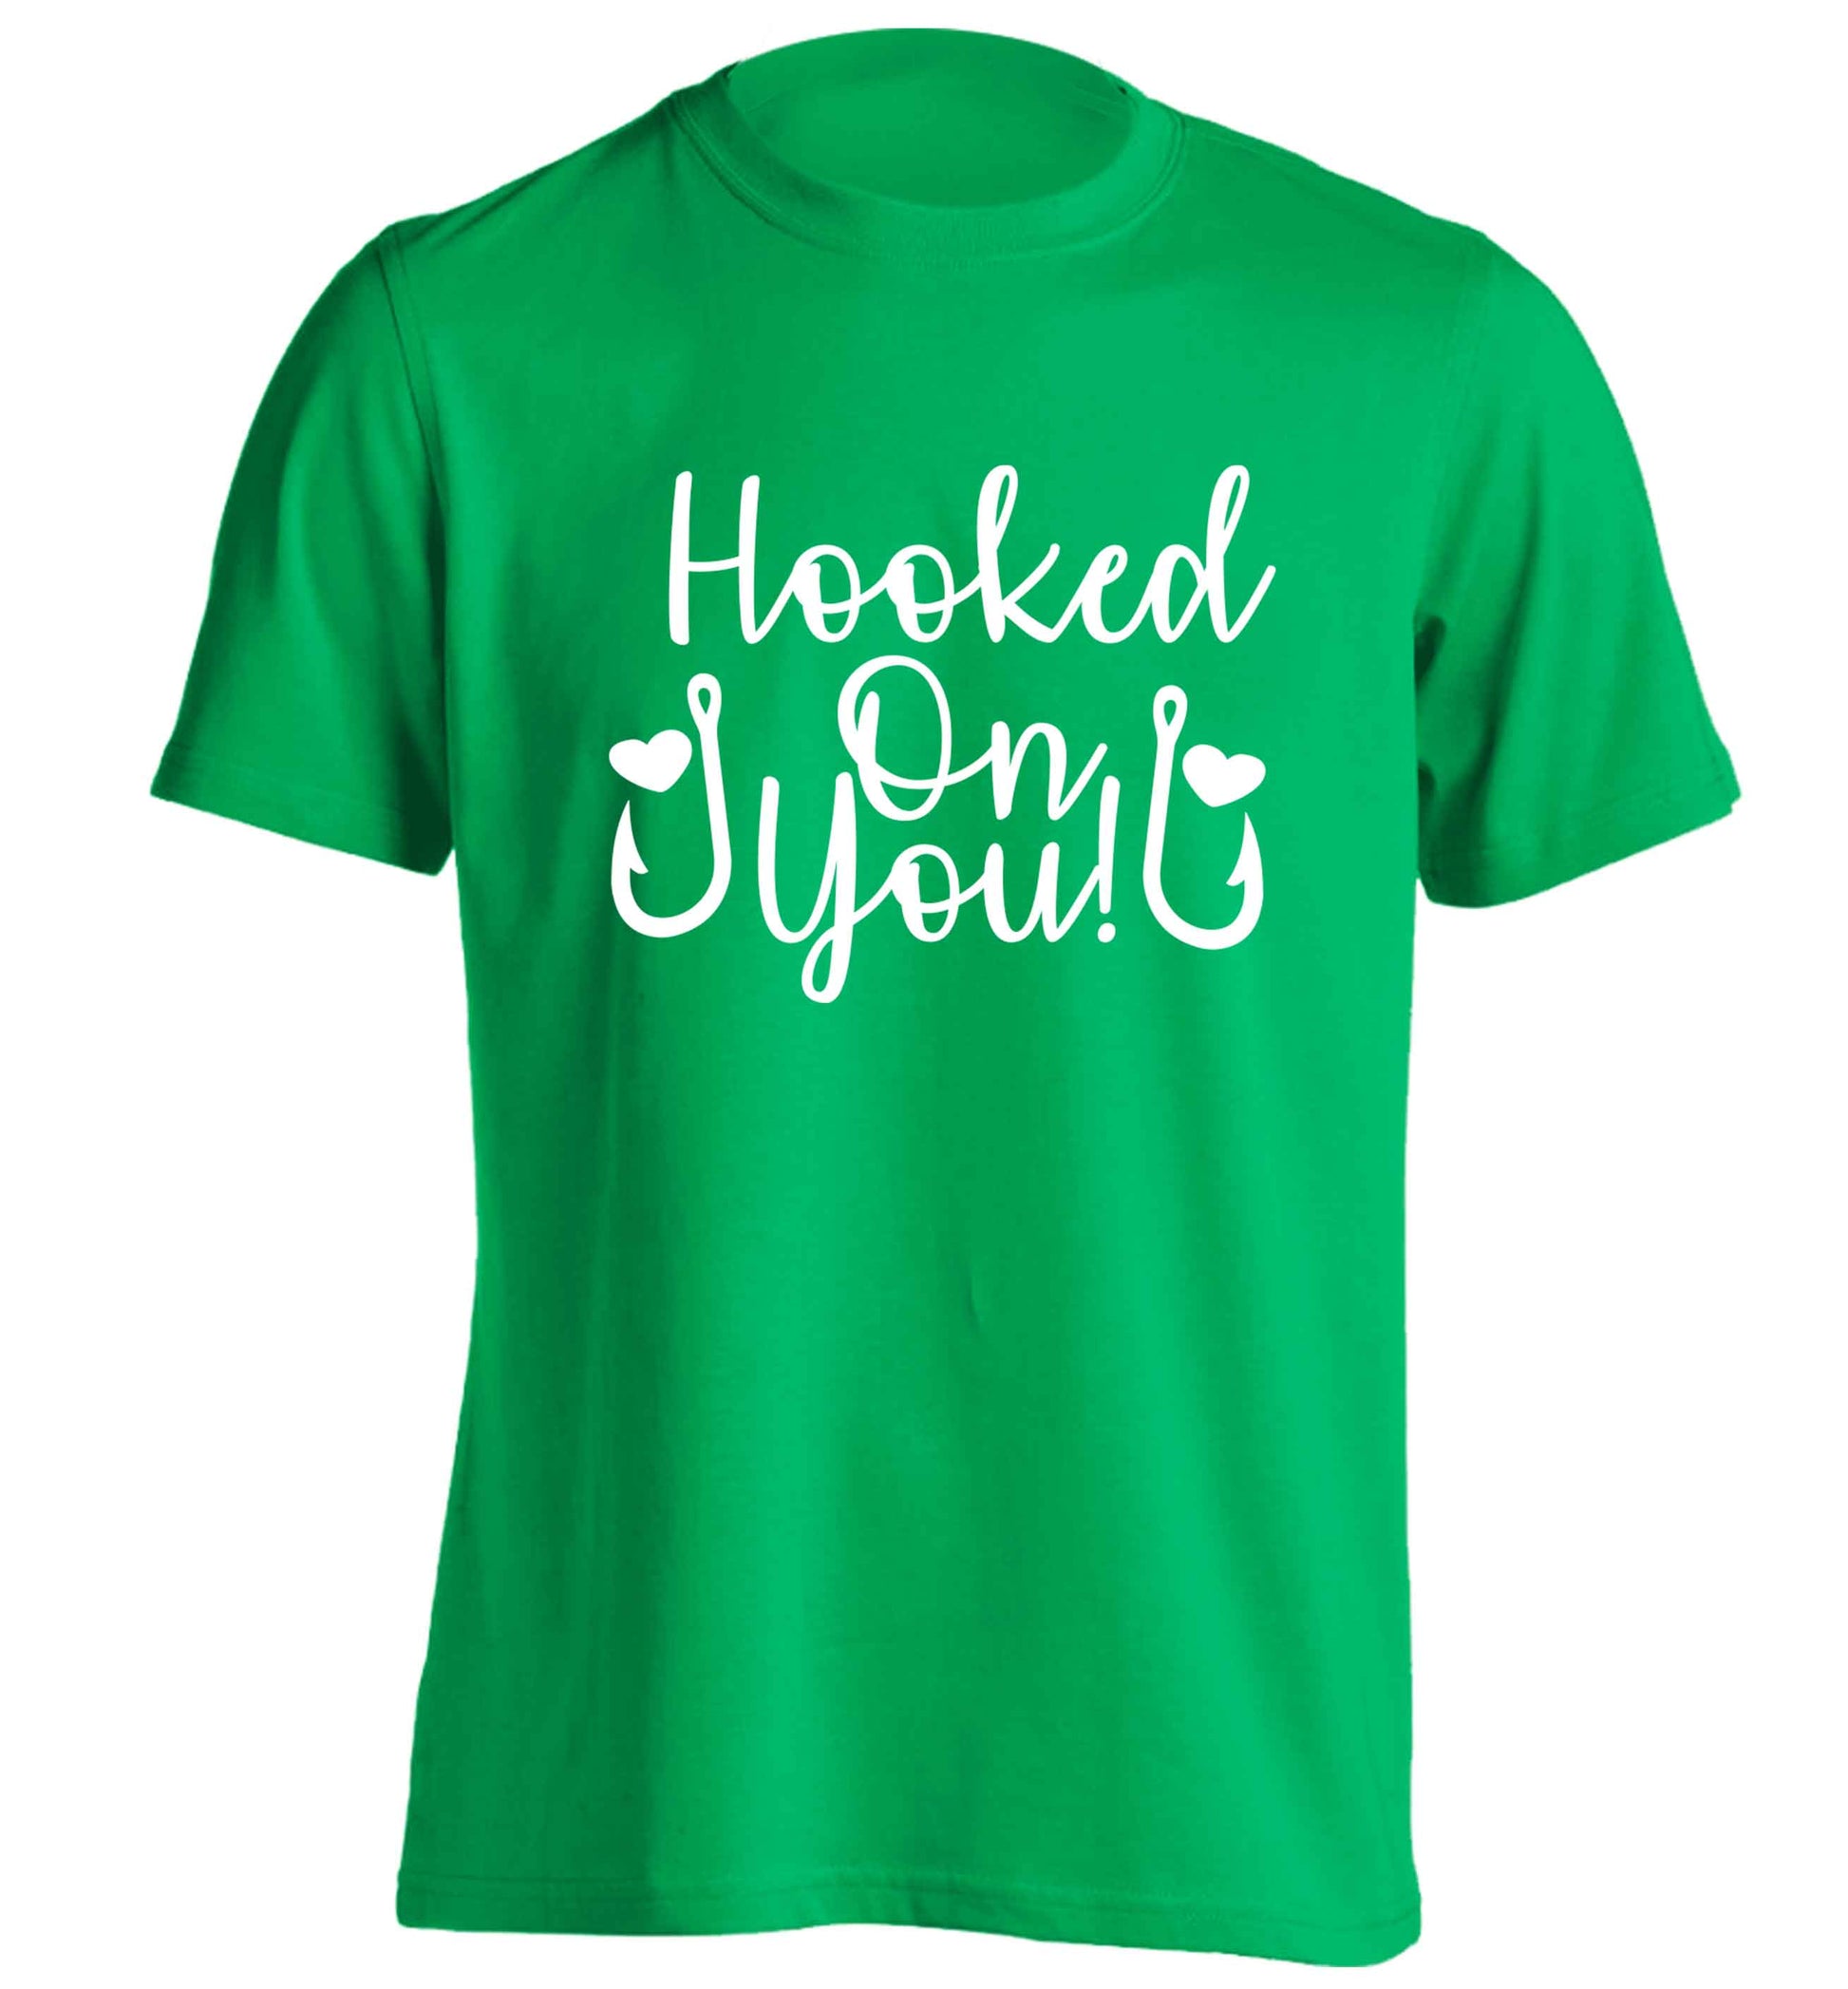 Hooked on you adults unisex green Tshirt 2XL